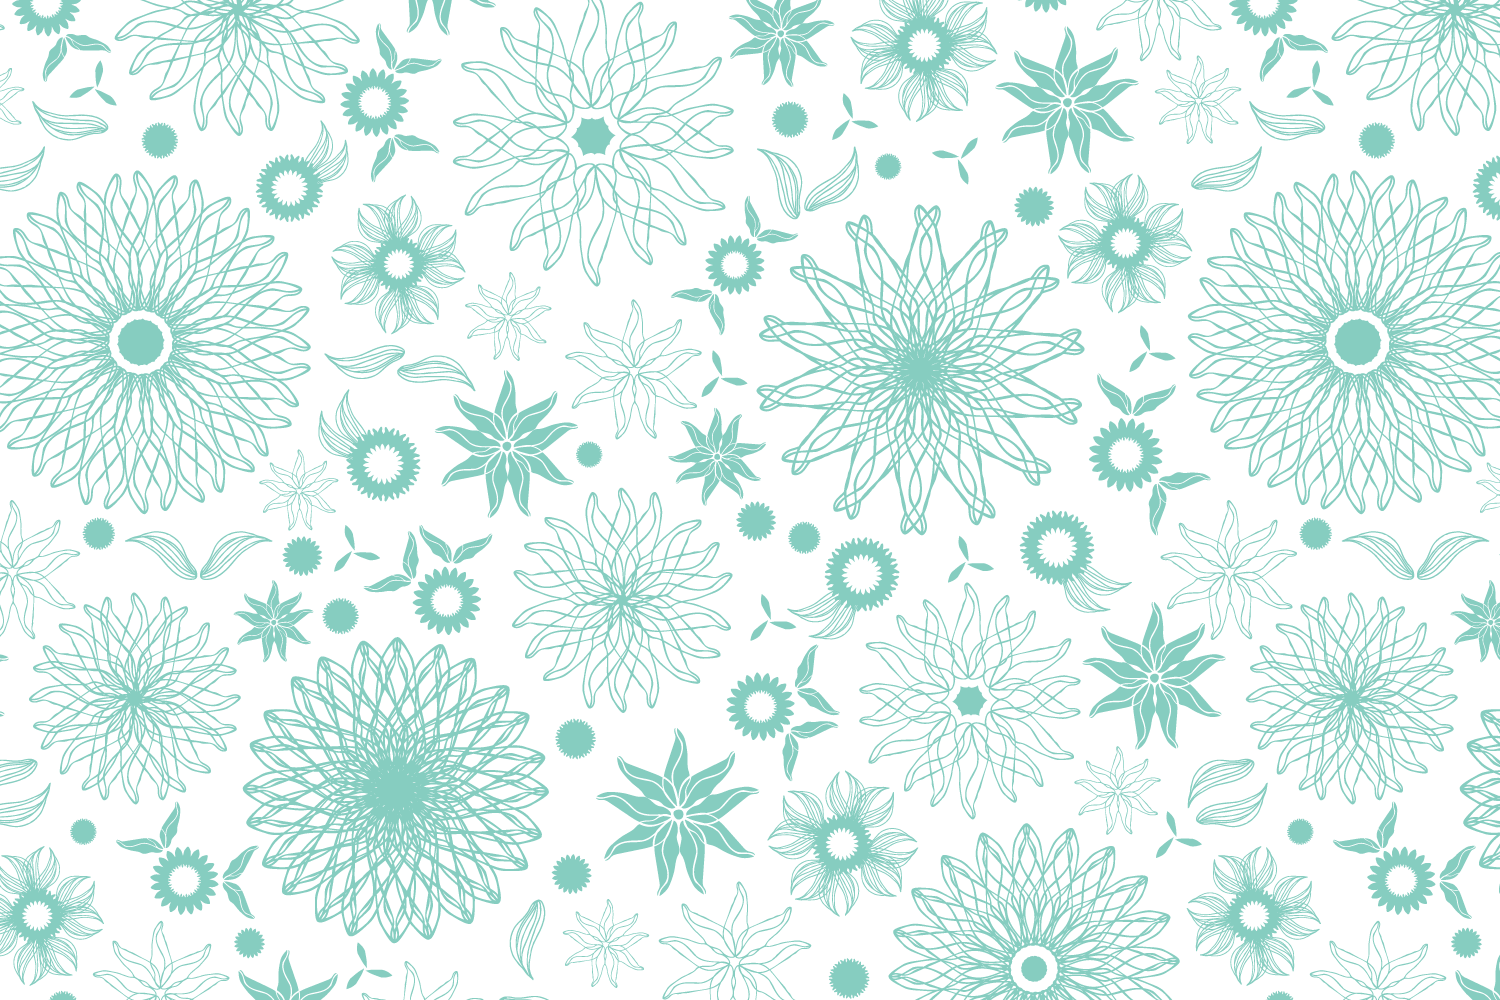 Floral_Variety_1500px_x_1000px-14.png